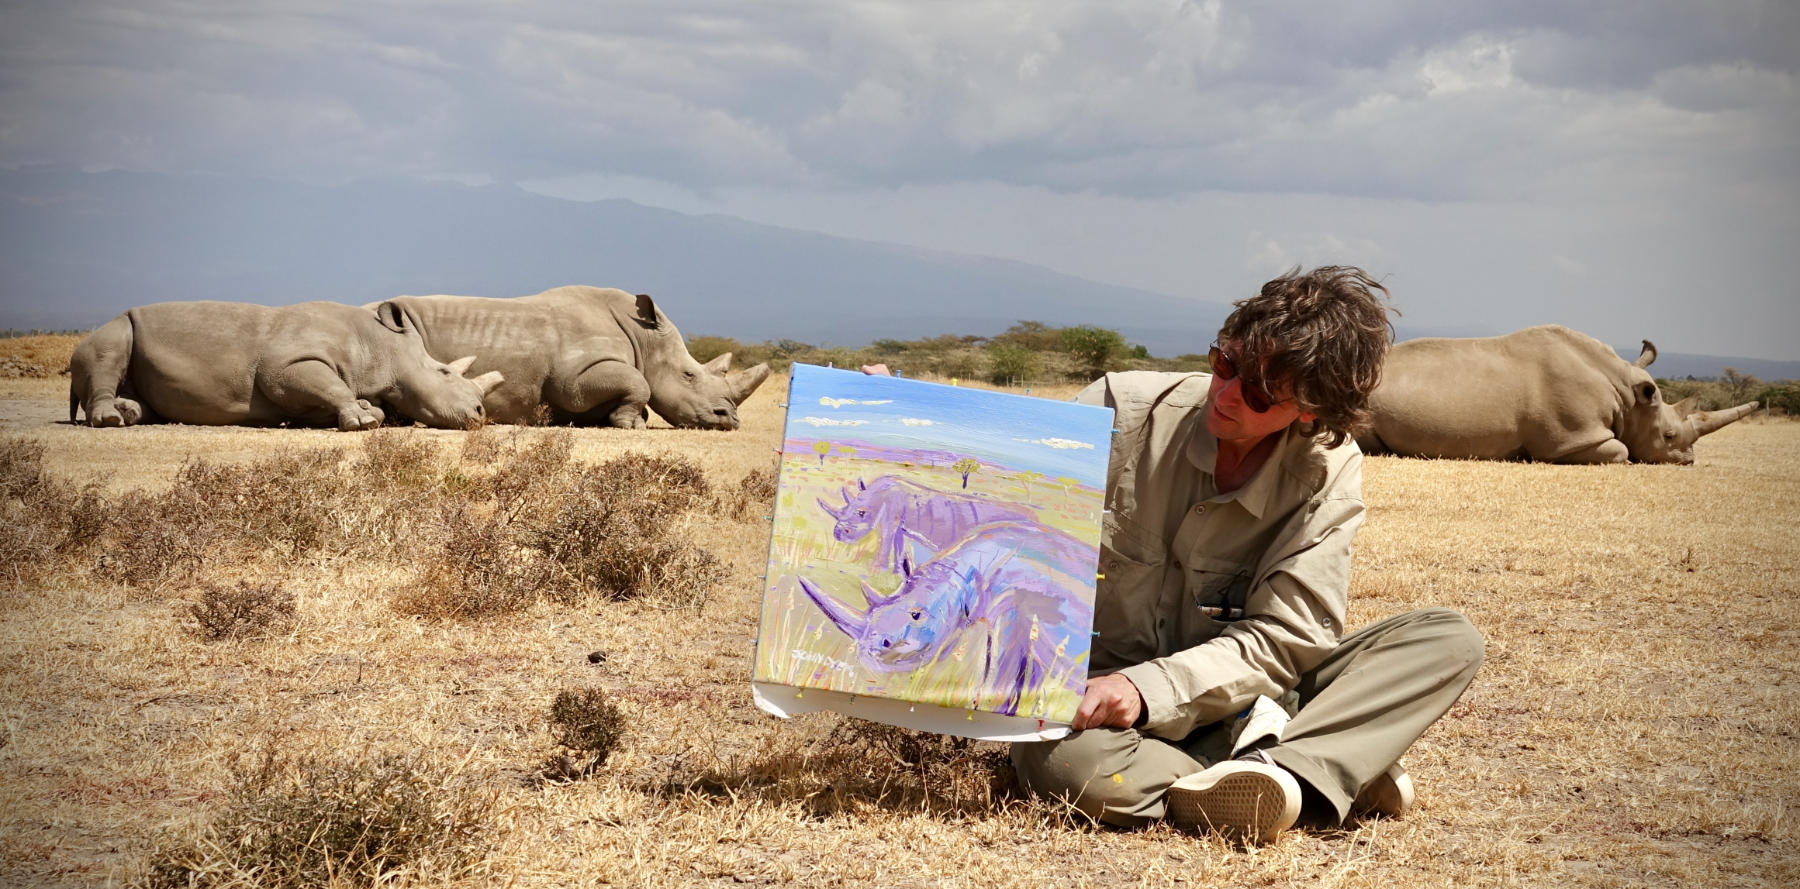 John Dyer pictured with one Southern White Rhino and the last two Northern White Rhino in Kenya at Ol Pejeta with he Northern White Rhino painting